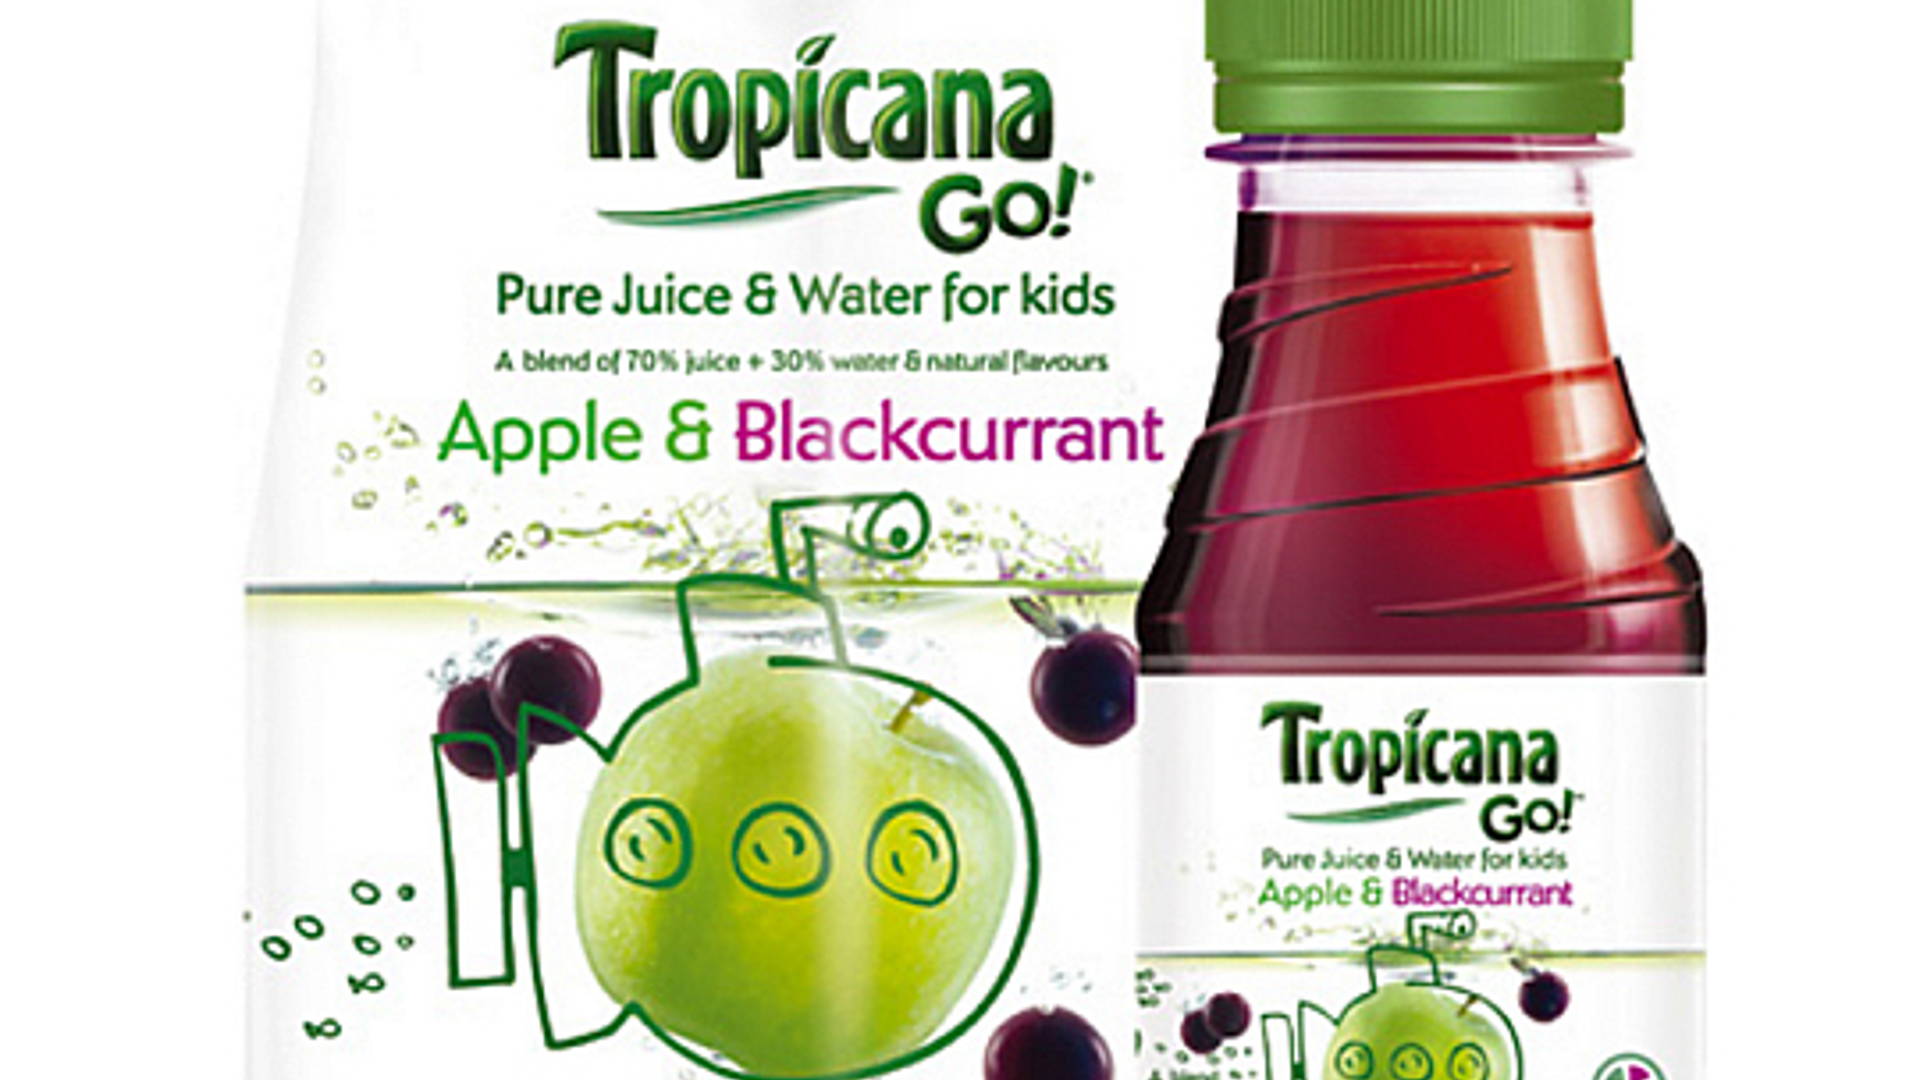 Featured image for Tropicana GO!